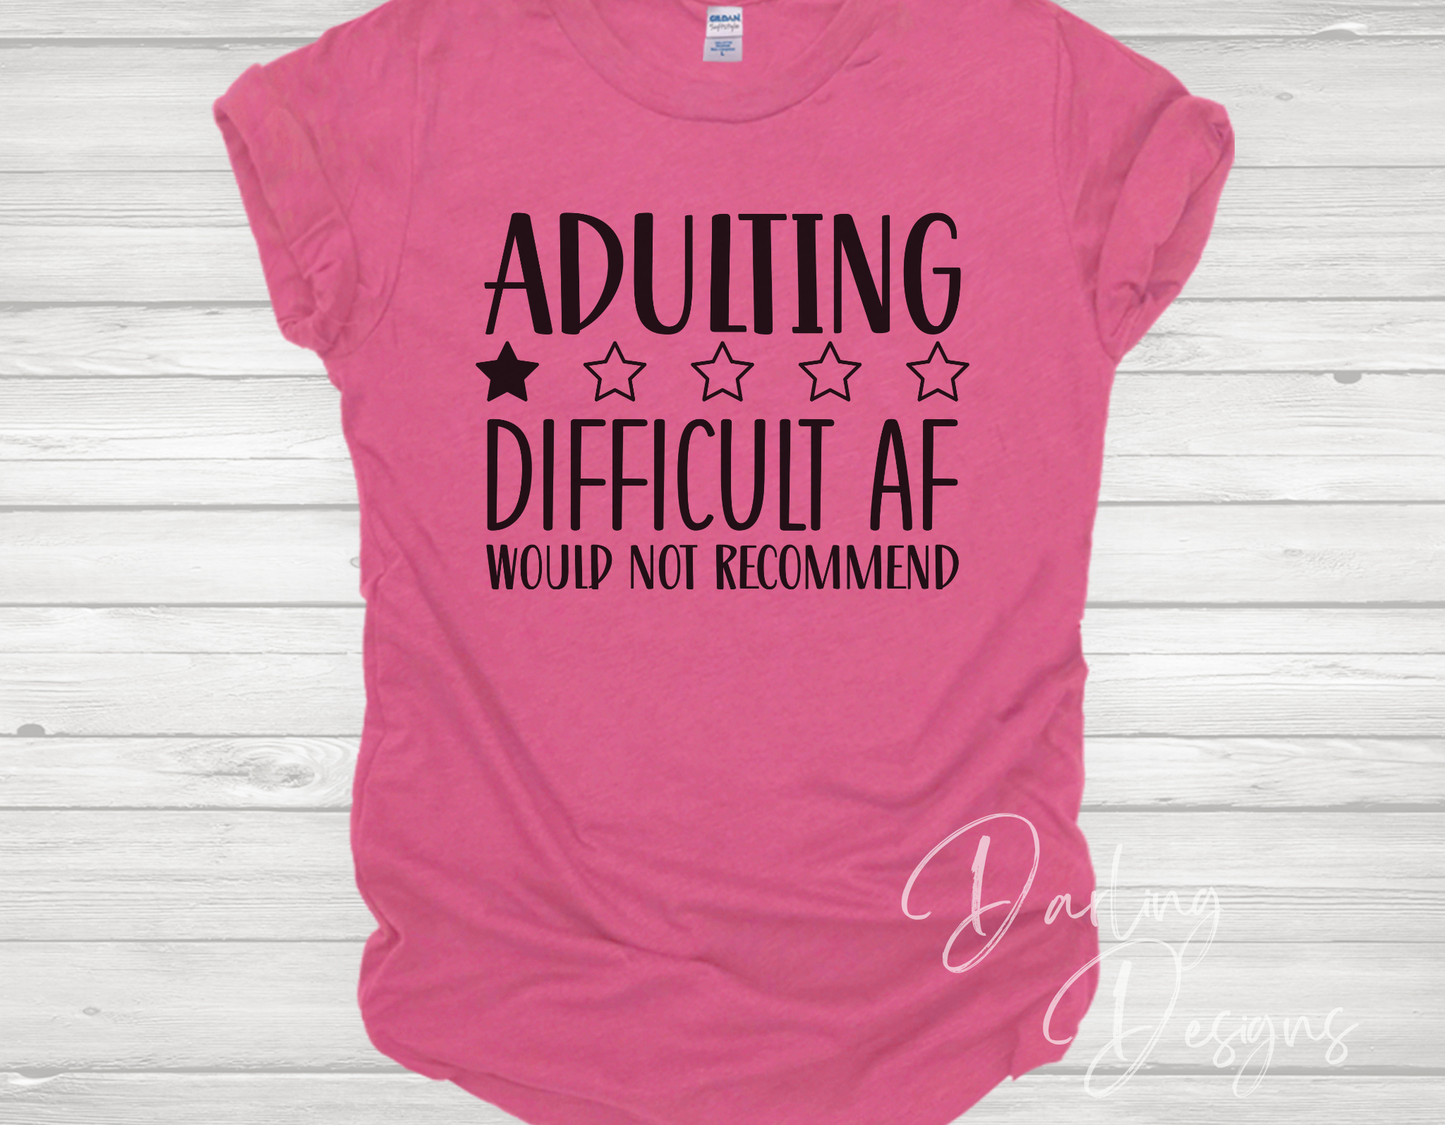 Adulting Difficult AF T-Shirt